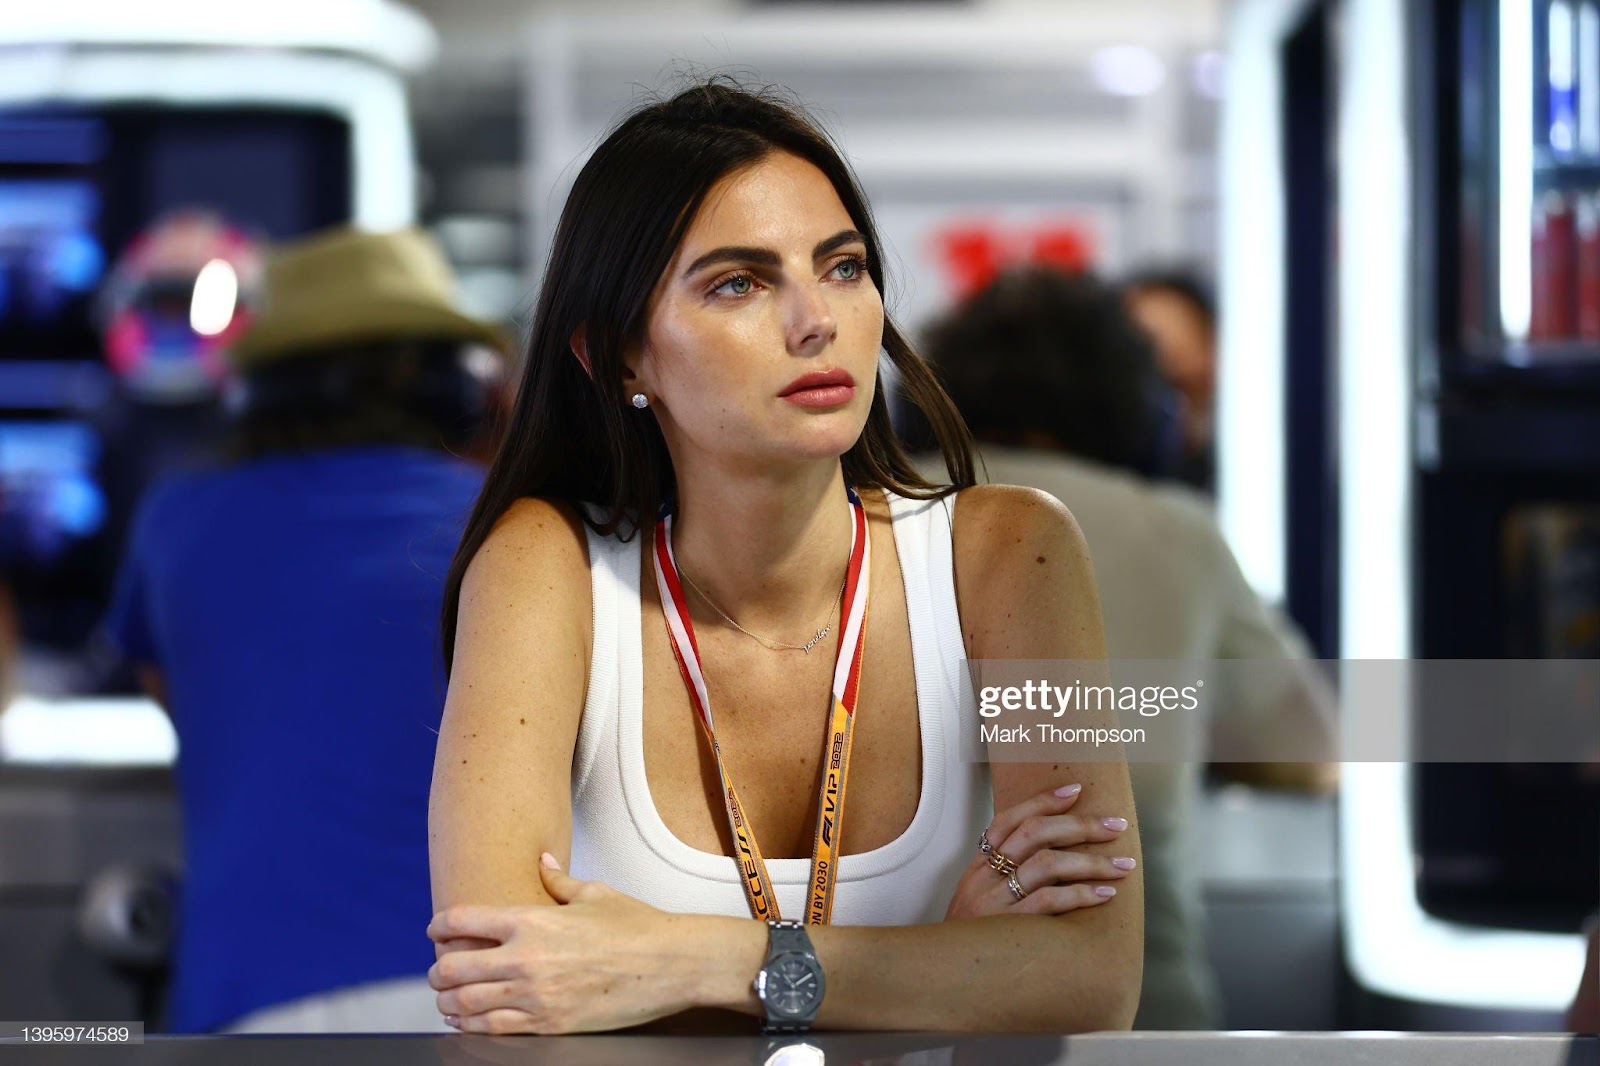 D:\Documenti\posts\posts\Miami\New folder\donne\donne piloti\kelly-piquet-looks-on-from-the-red-bull-racing-garage-during-ahead-picture-id1395974589.jpg